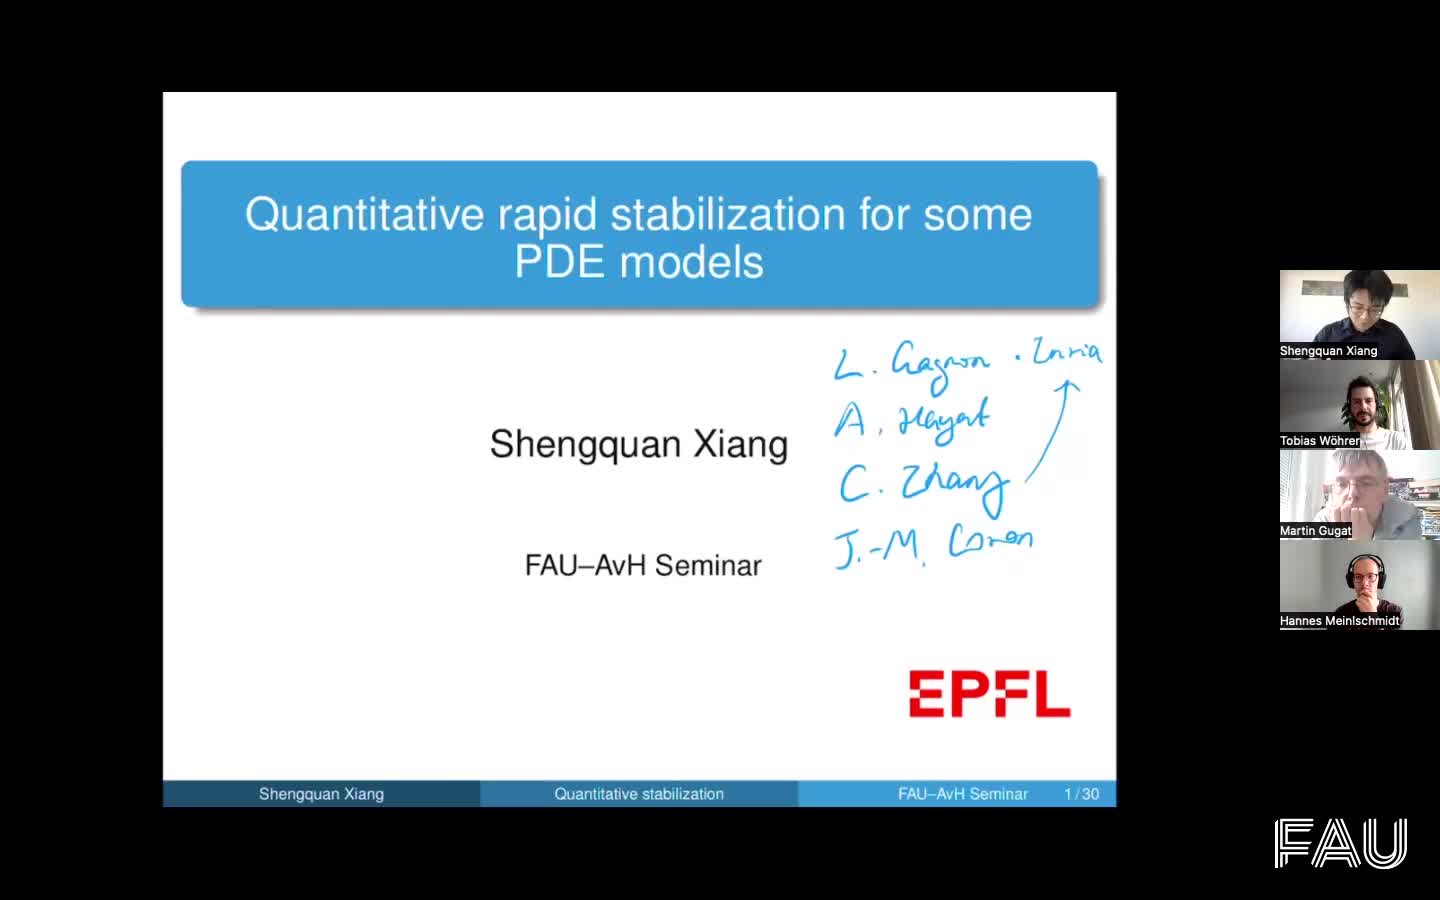 Quantitative rapid stabilization of some PDE models (Shengquan Xiang, EPFL) preview image